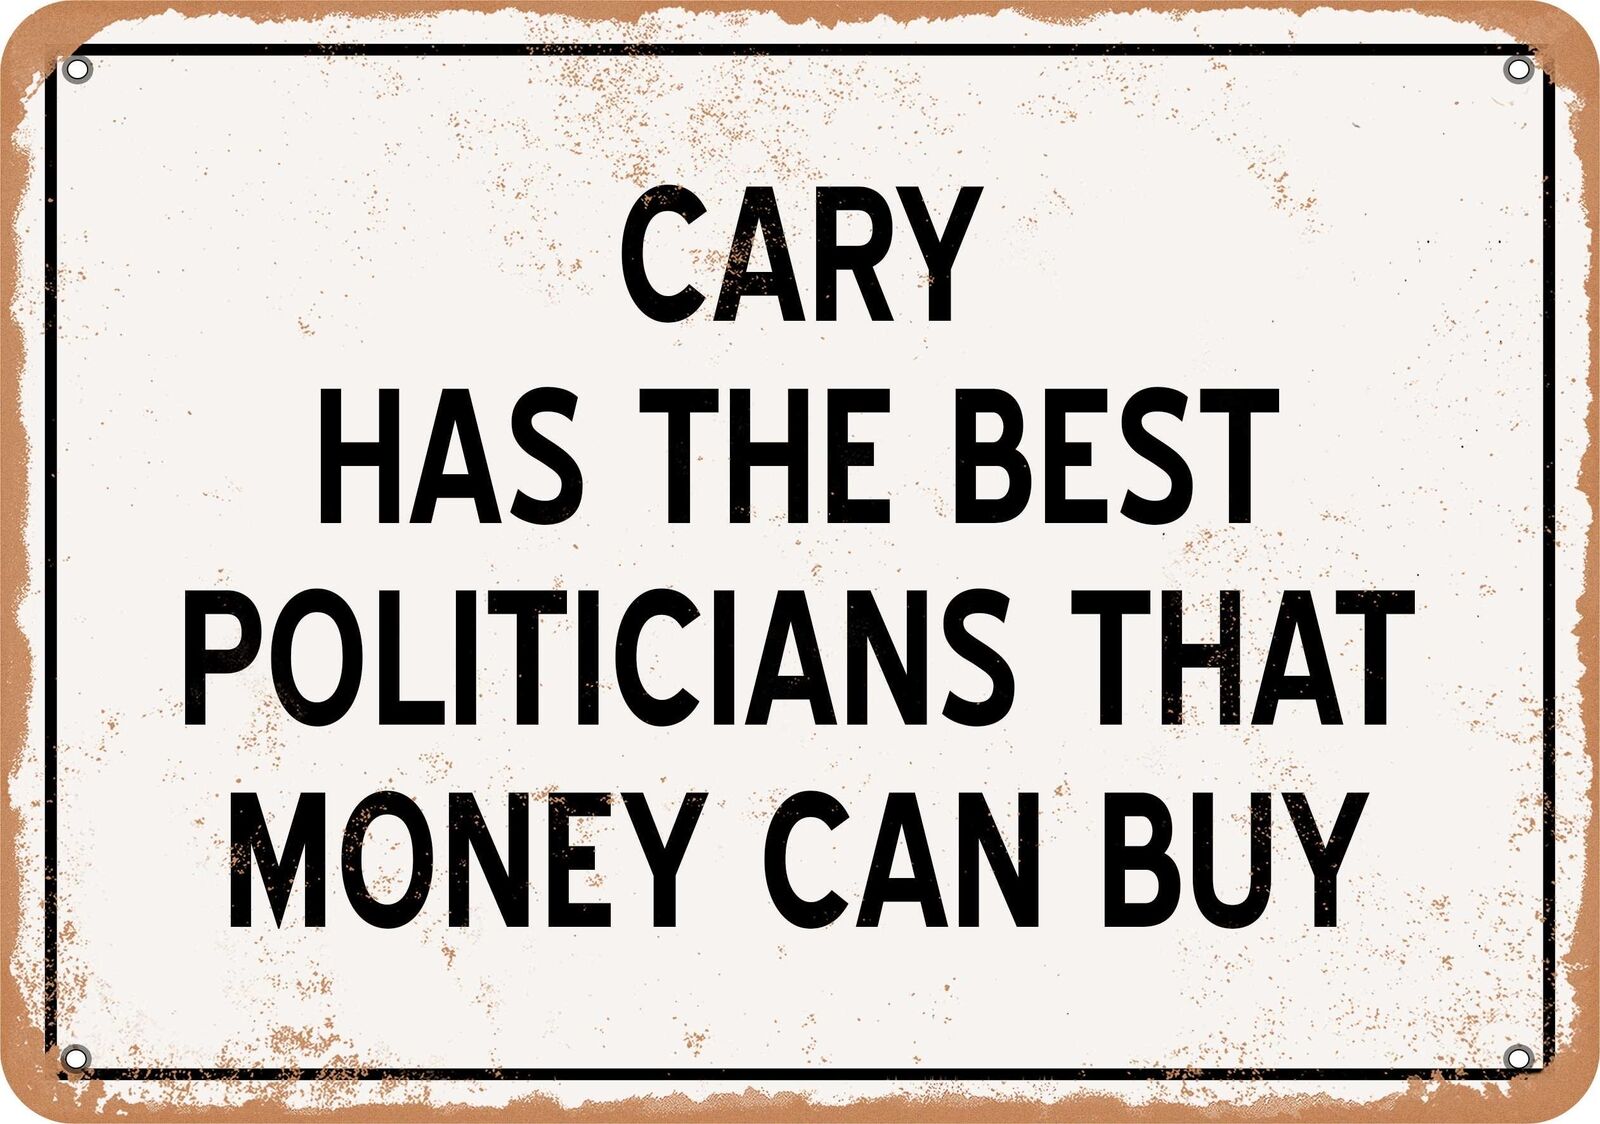 Metal Sign - Cary Politicians Are the Best Money Can Buy - Rust Look